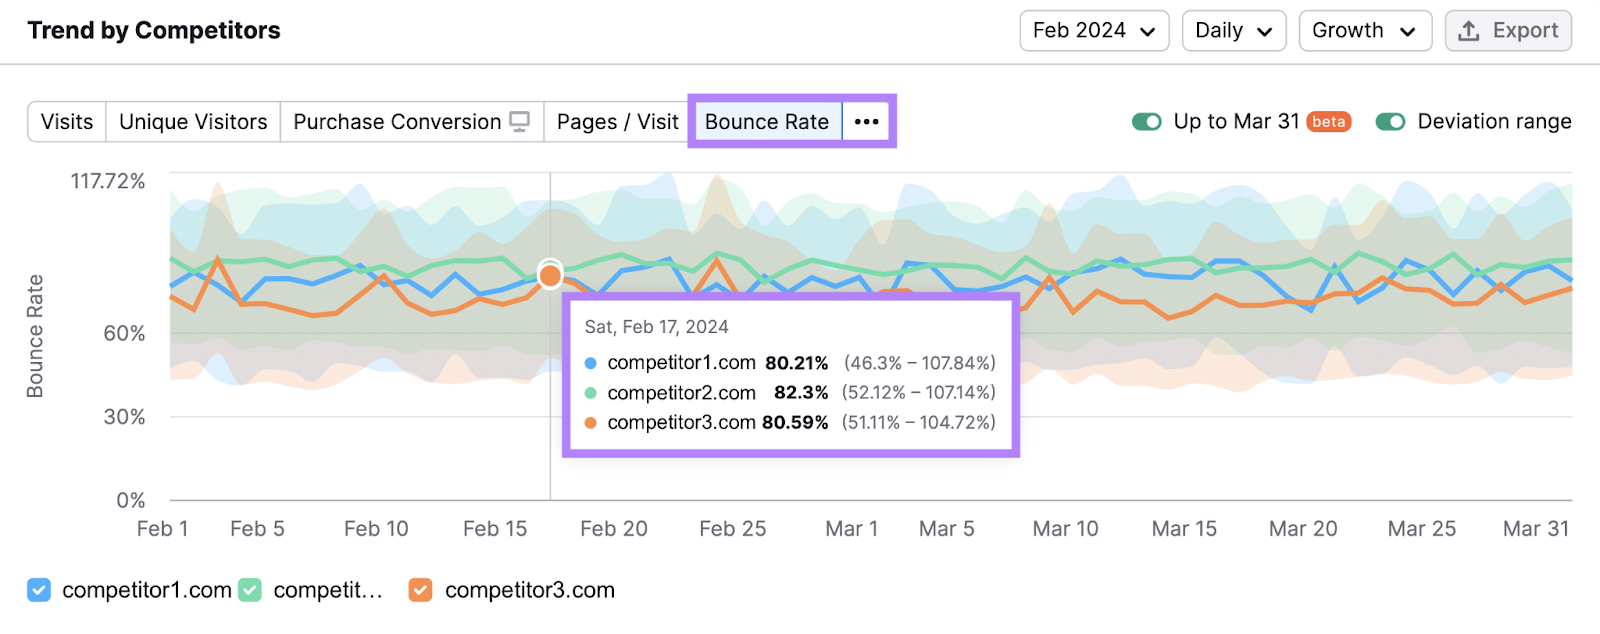 Bounce complaint   inclination   graphs successful  the "Trend by Competitors" section